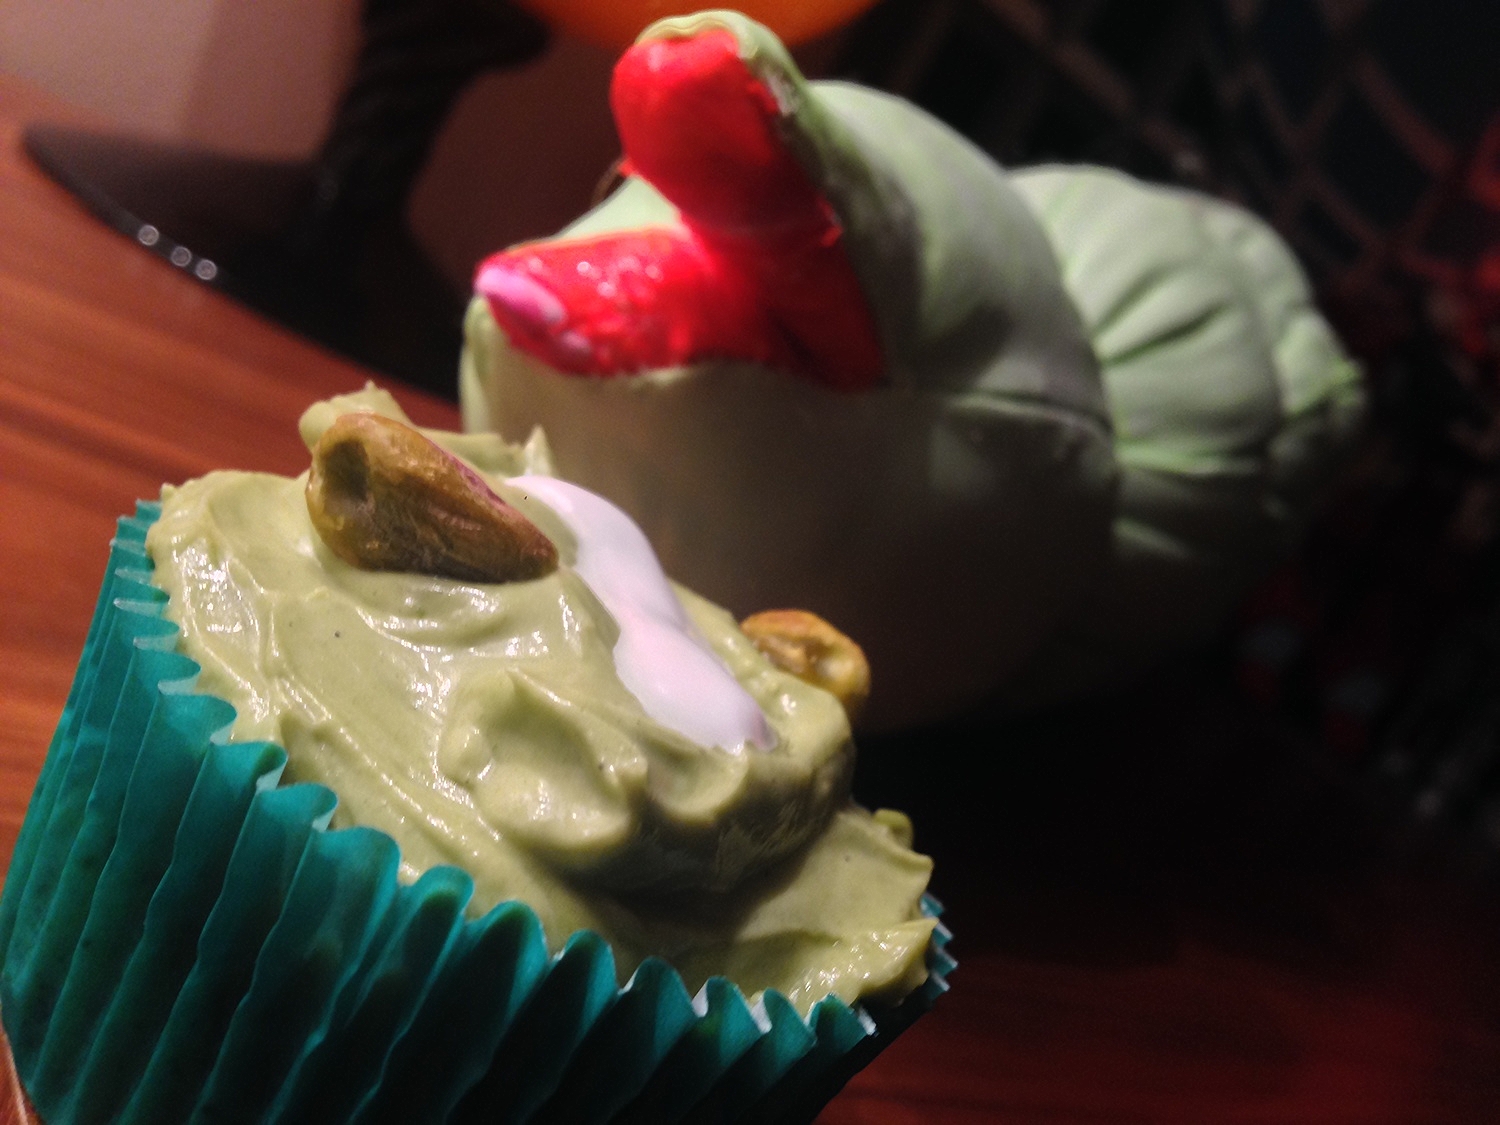 Closeup of a green iced cupcake being menaced by a puppet maggot